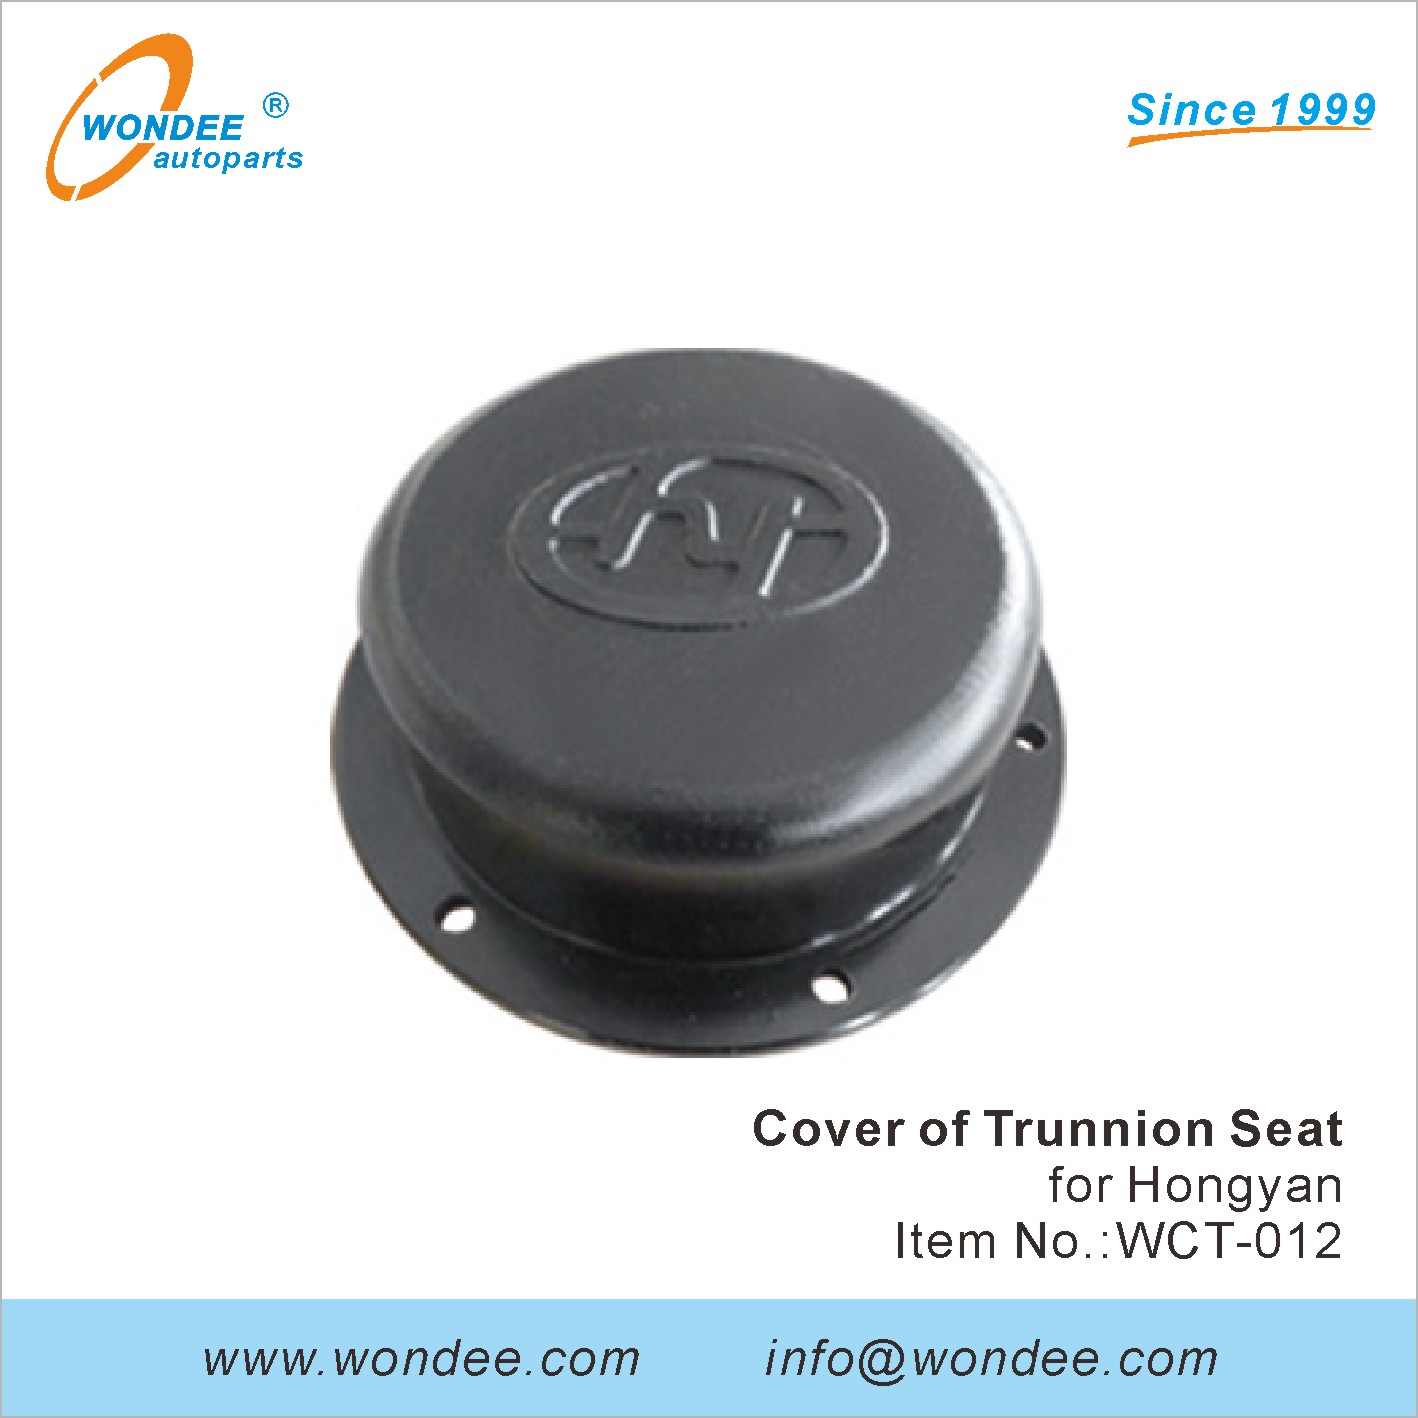 WONDEE cover of trunnion seat (12)